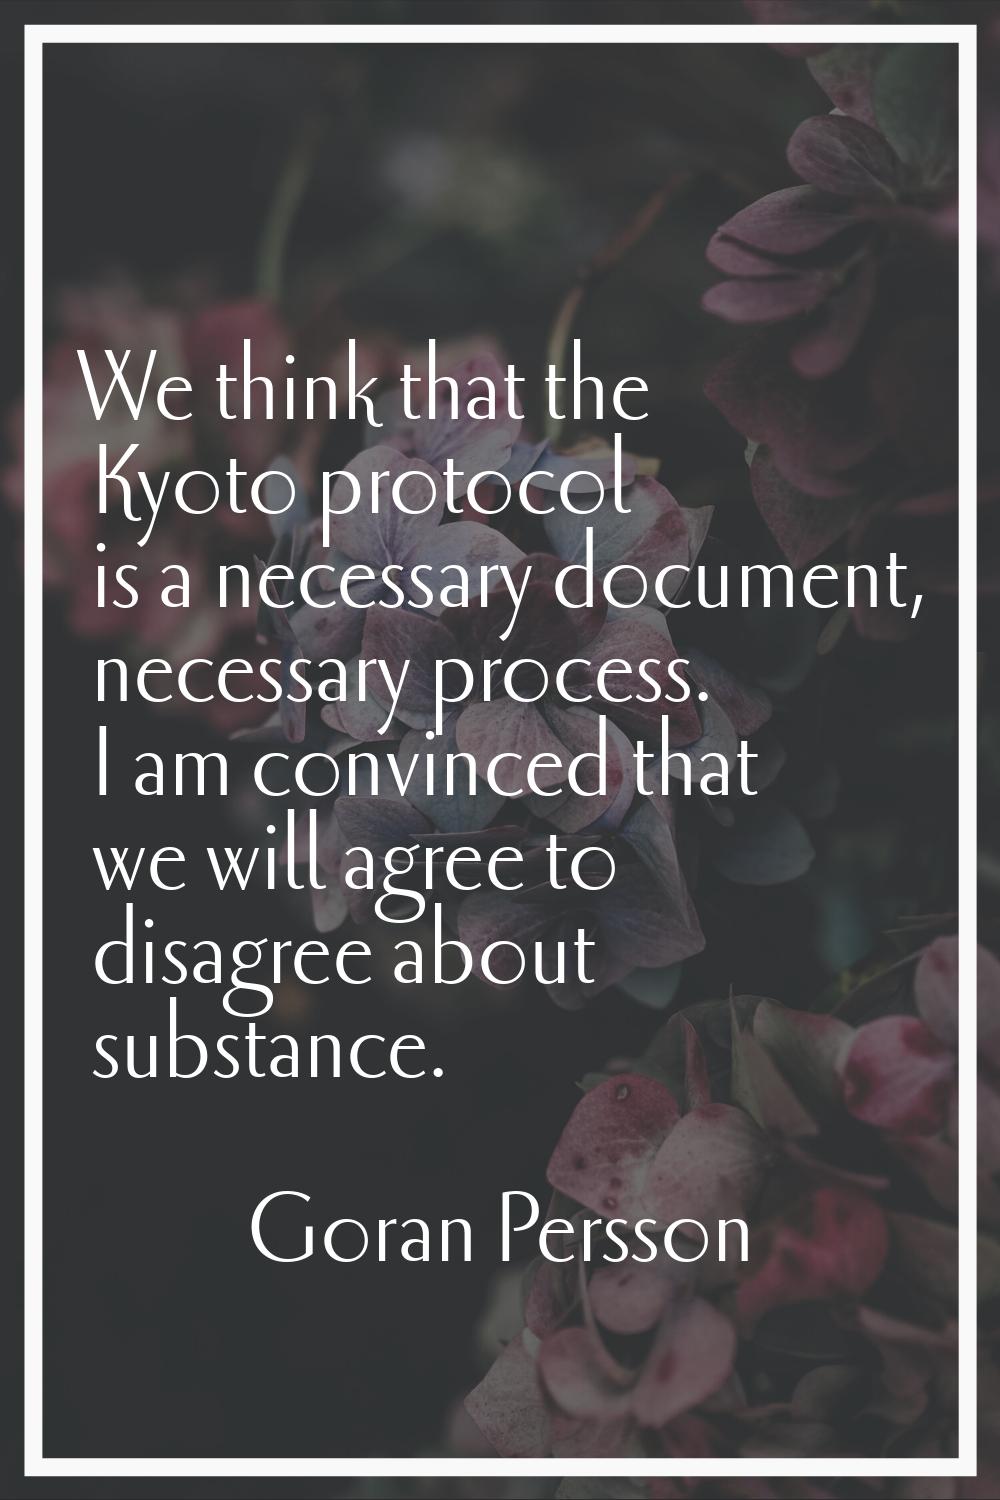 We think that the Kyoto protocol is a necessary document, necessary process. I am convinced that we